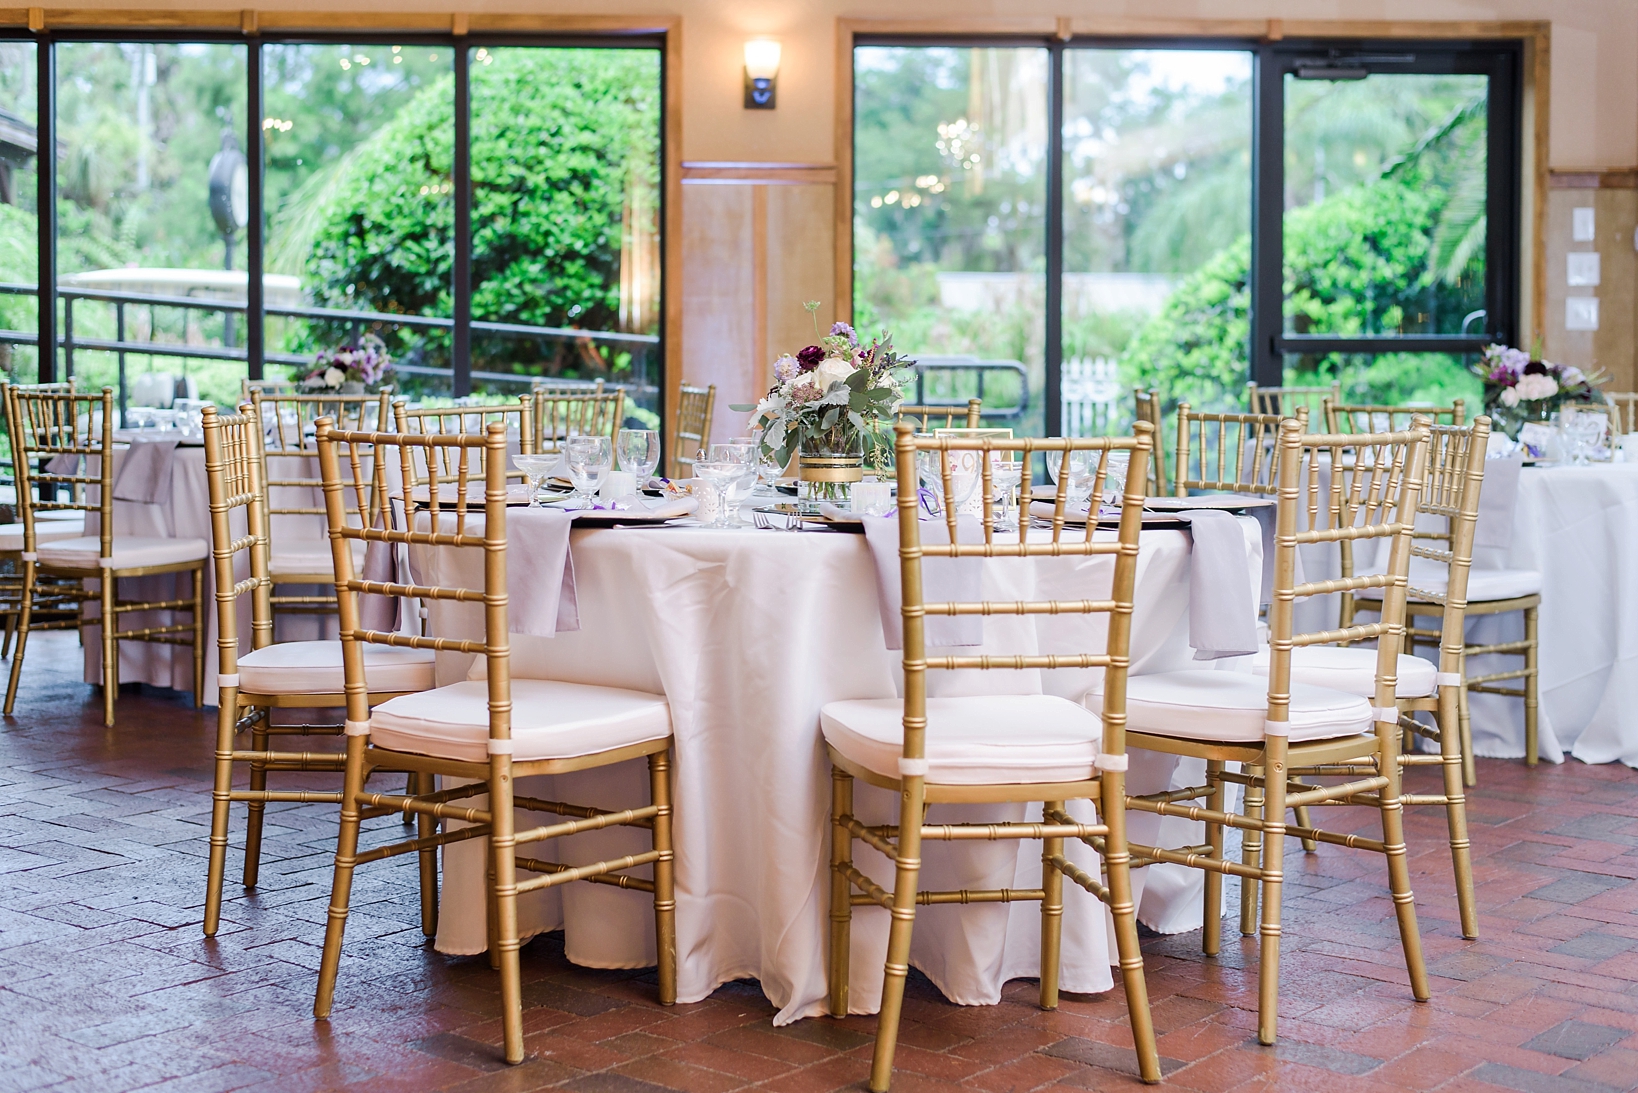 Gold chiavari chairs finished off the room details at this wedding reception